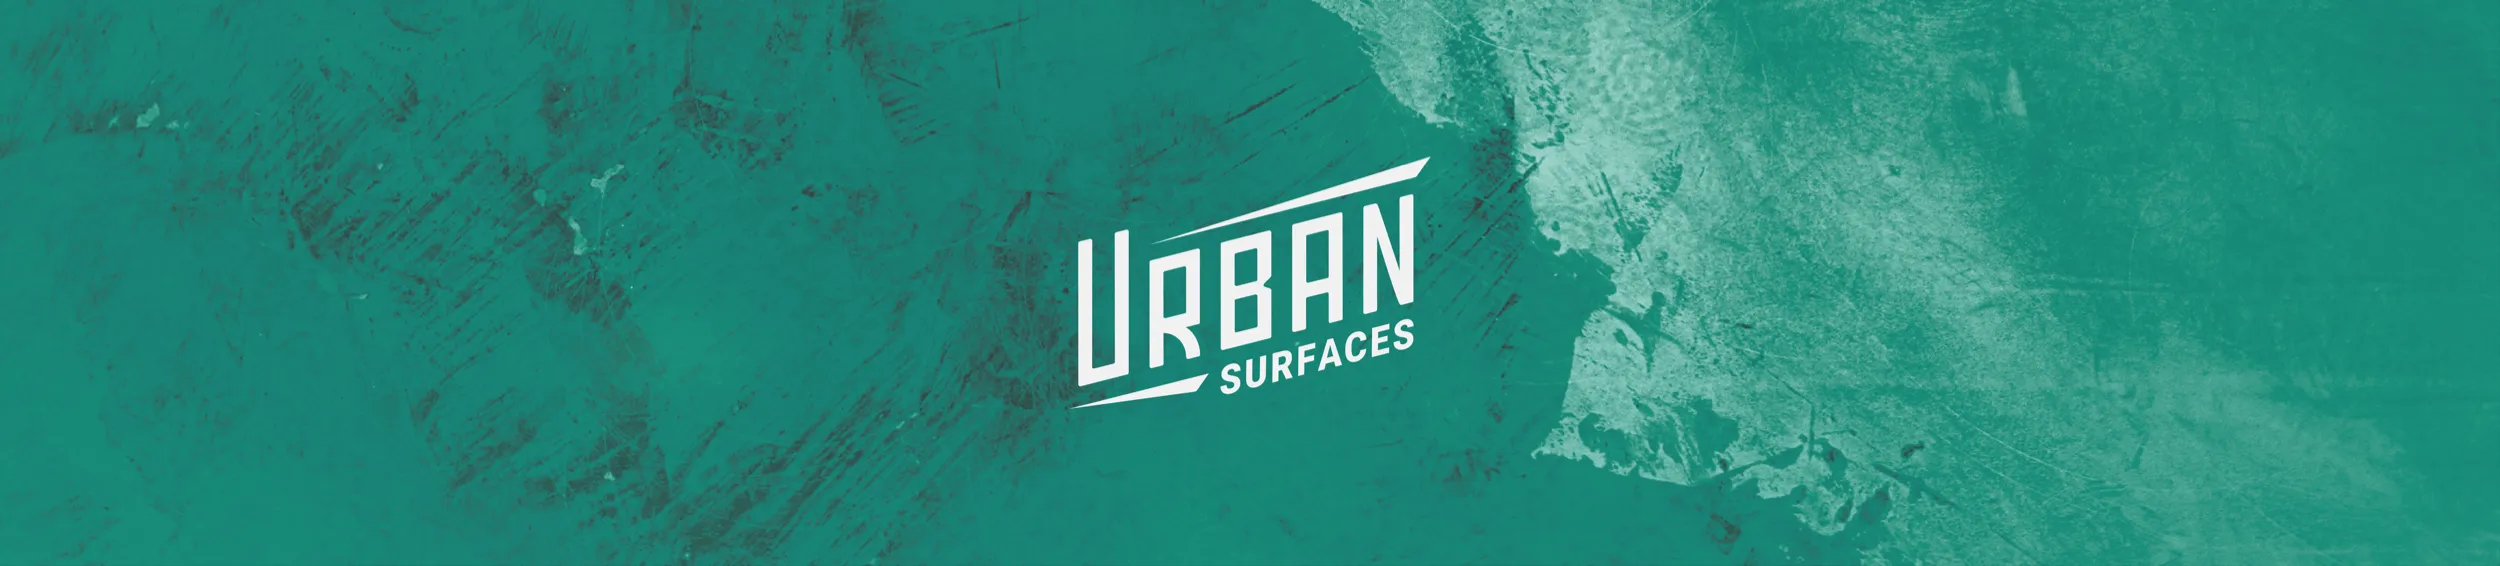 Urban Surfaces logo on a textured green banner